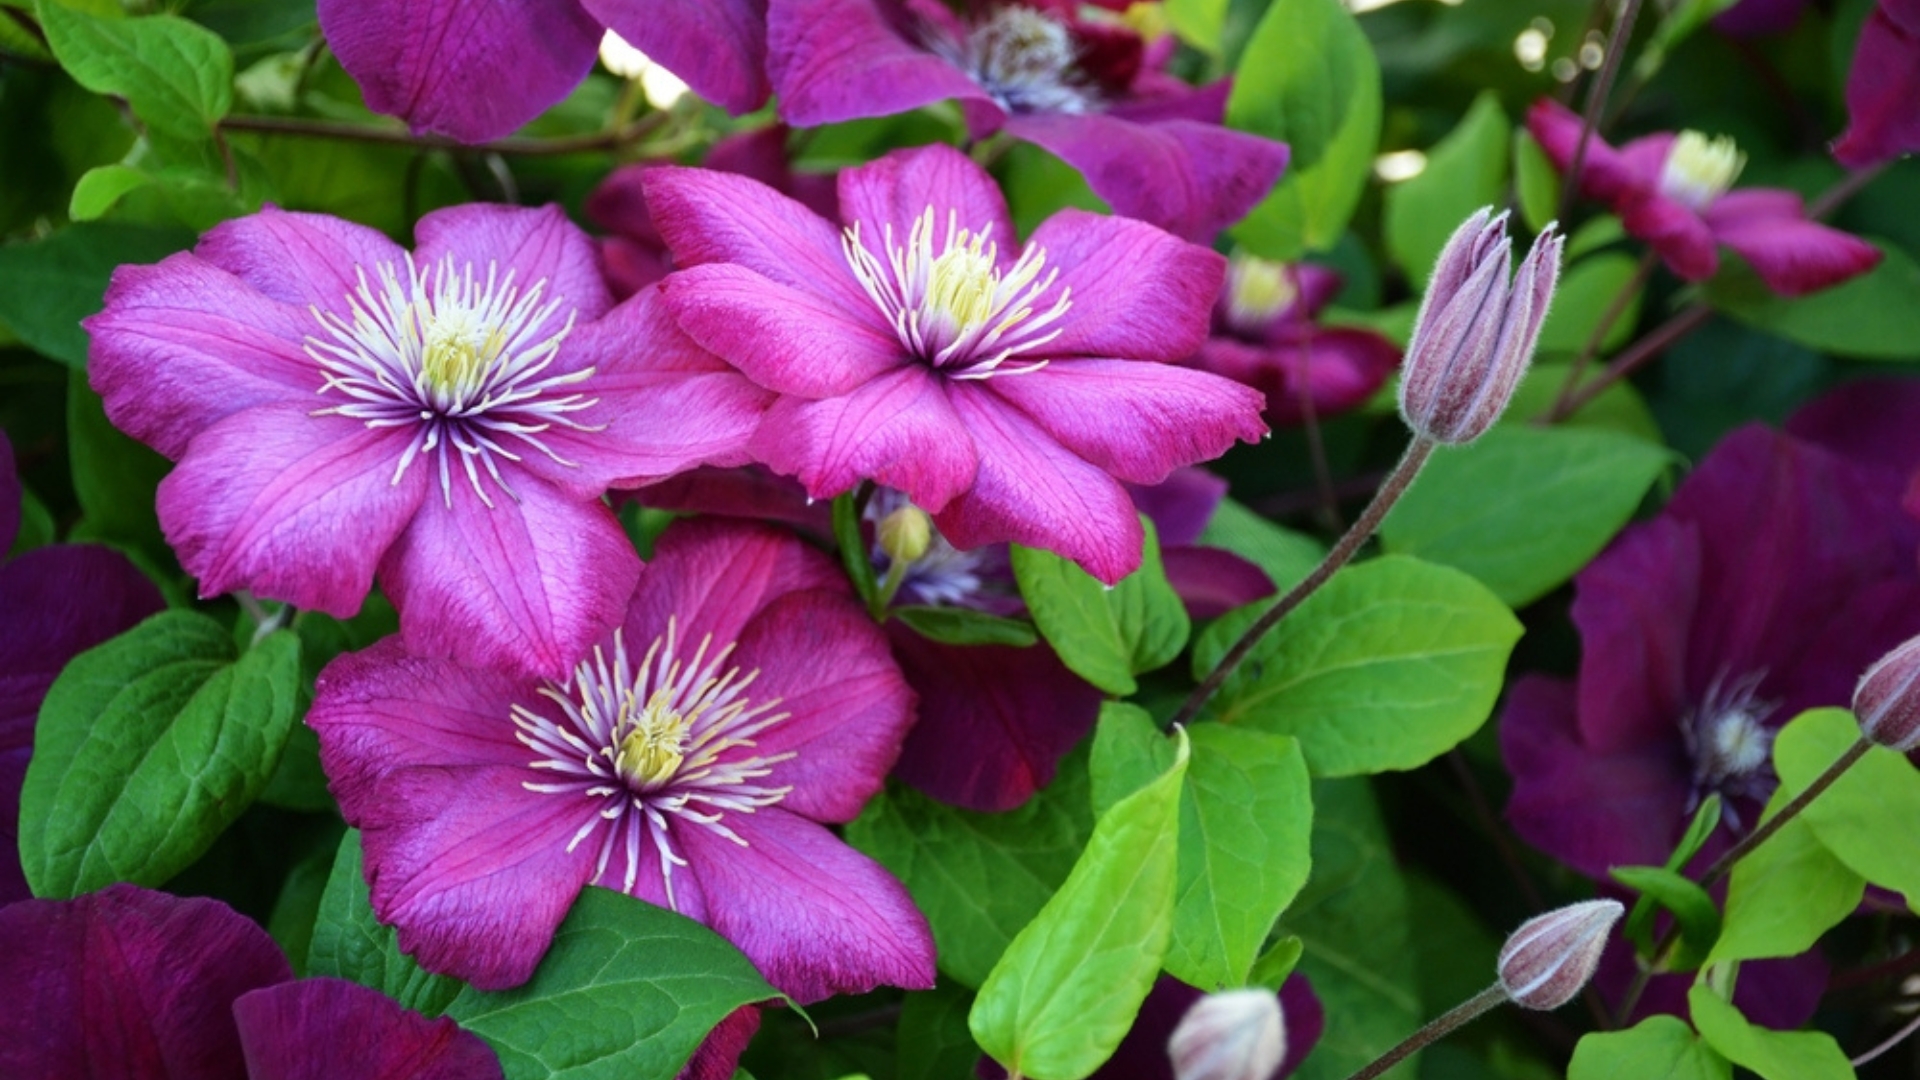 Follow These 8 Easy Steps To Propagate Your Clematis Plants – Softwood Cuttings Are Your Secret Weapon